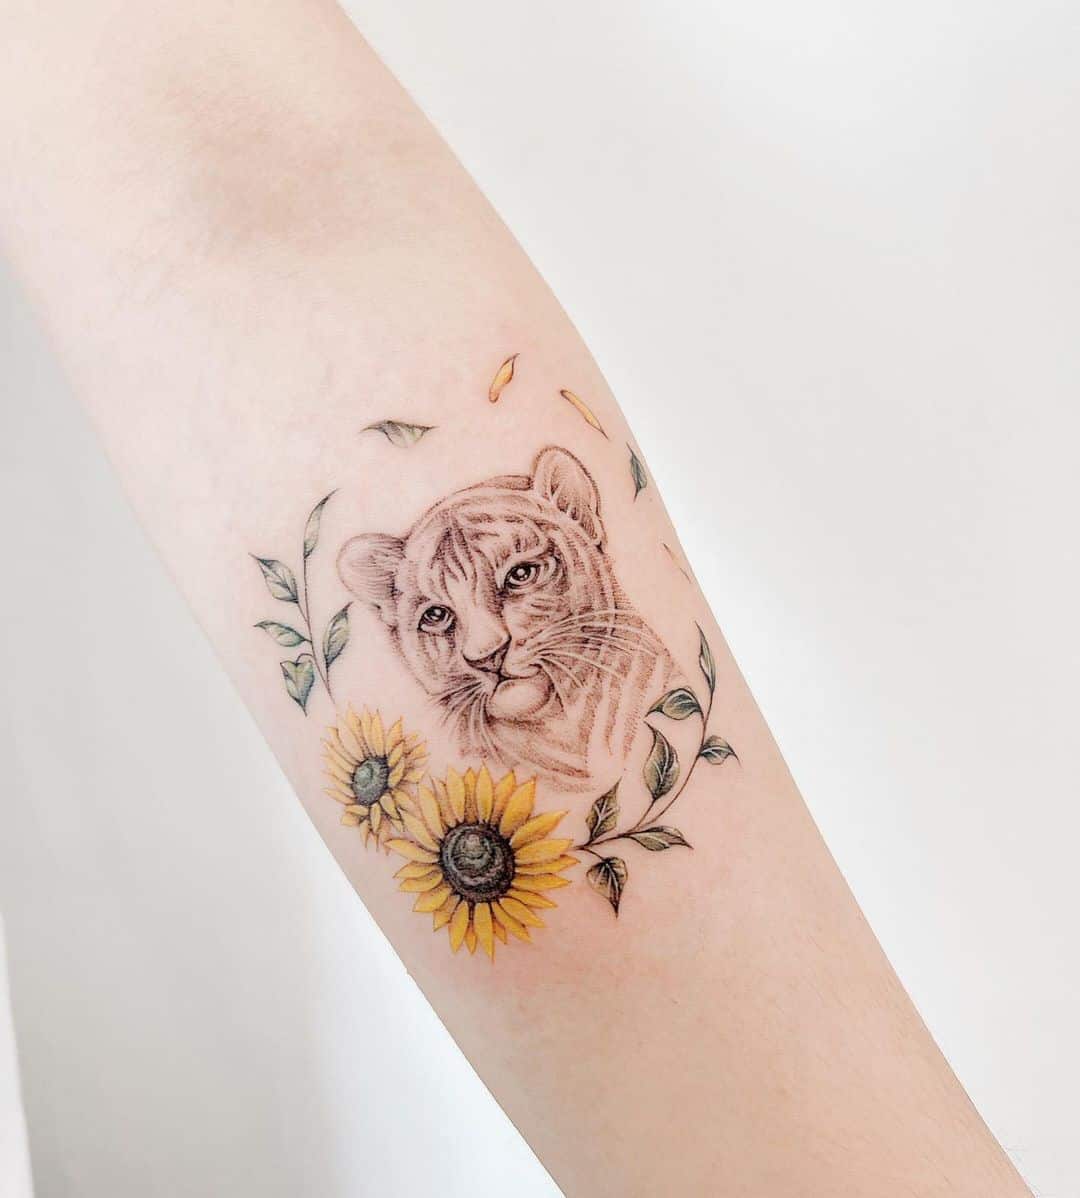 Delicate sunflower tattoos with tiger